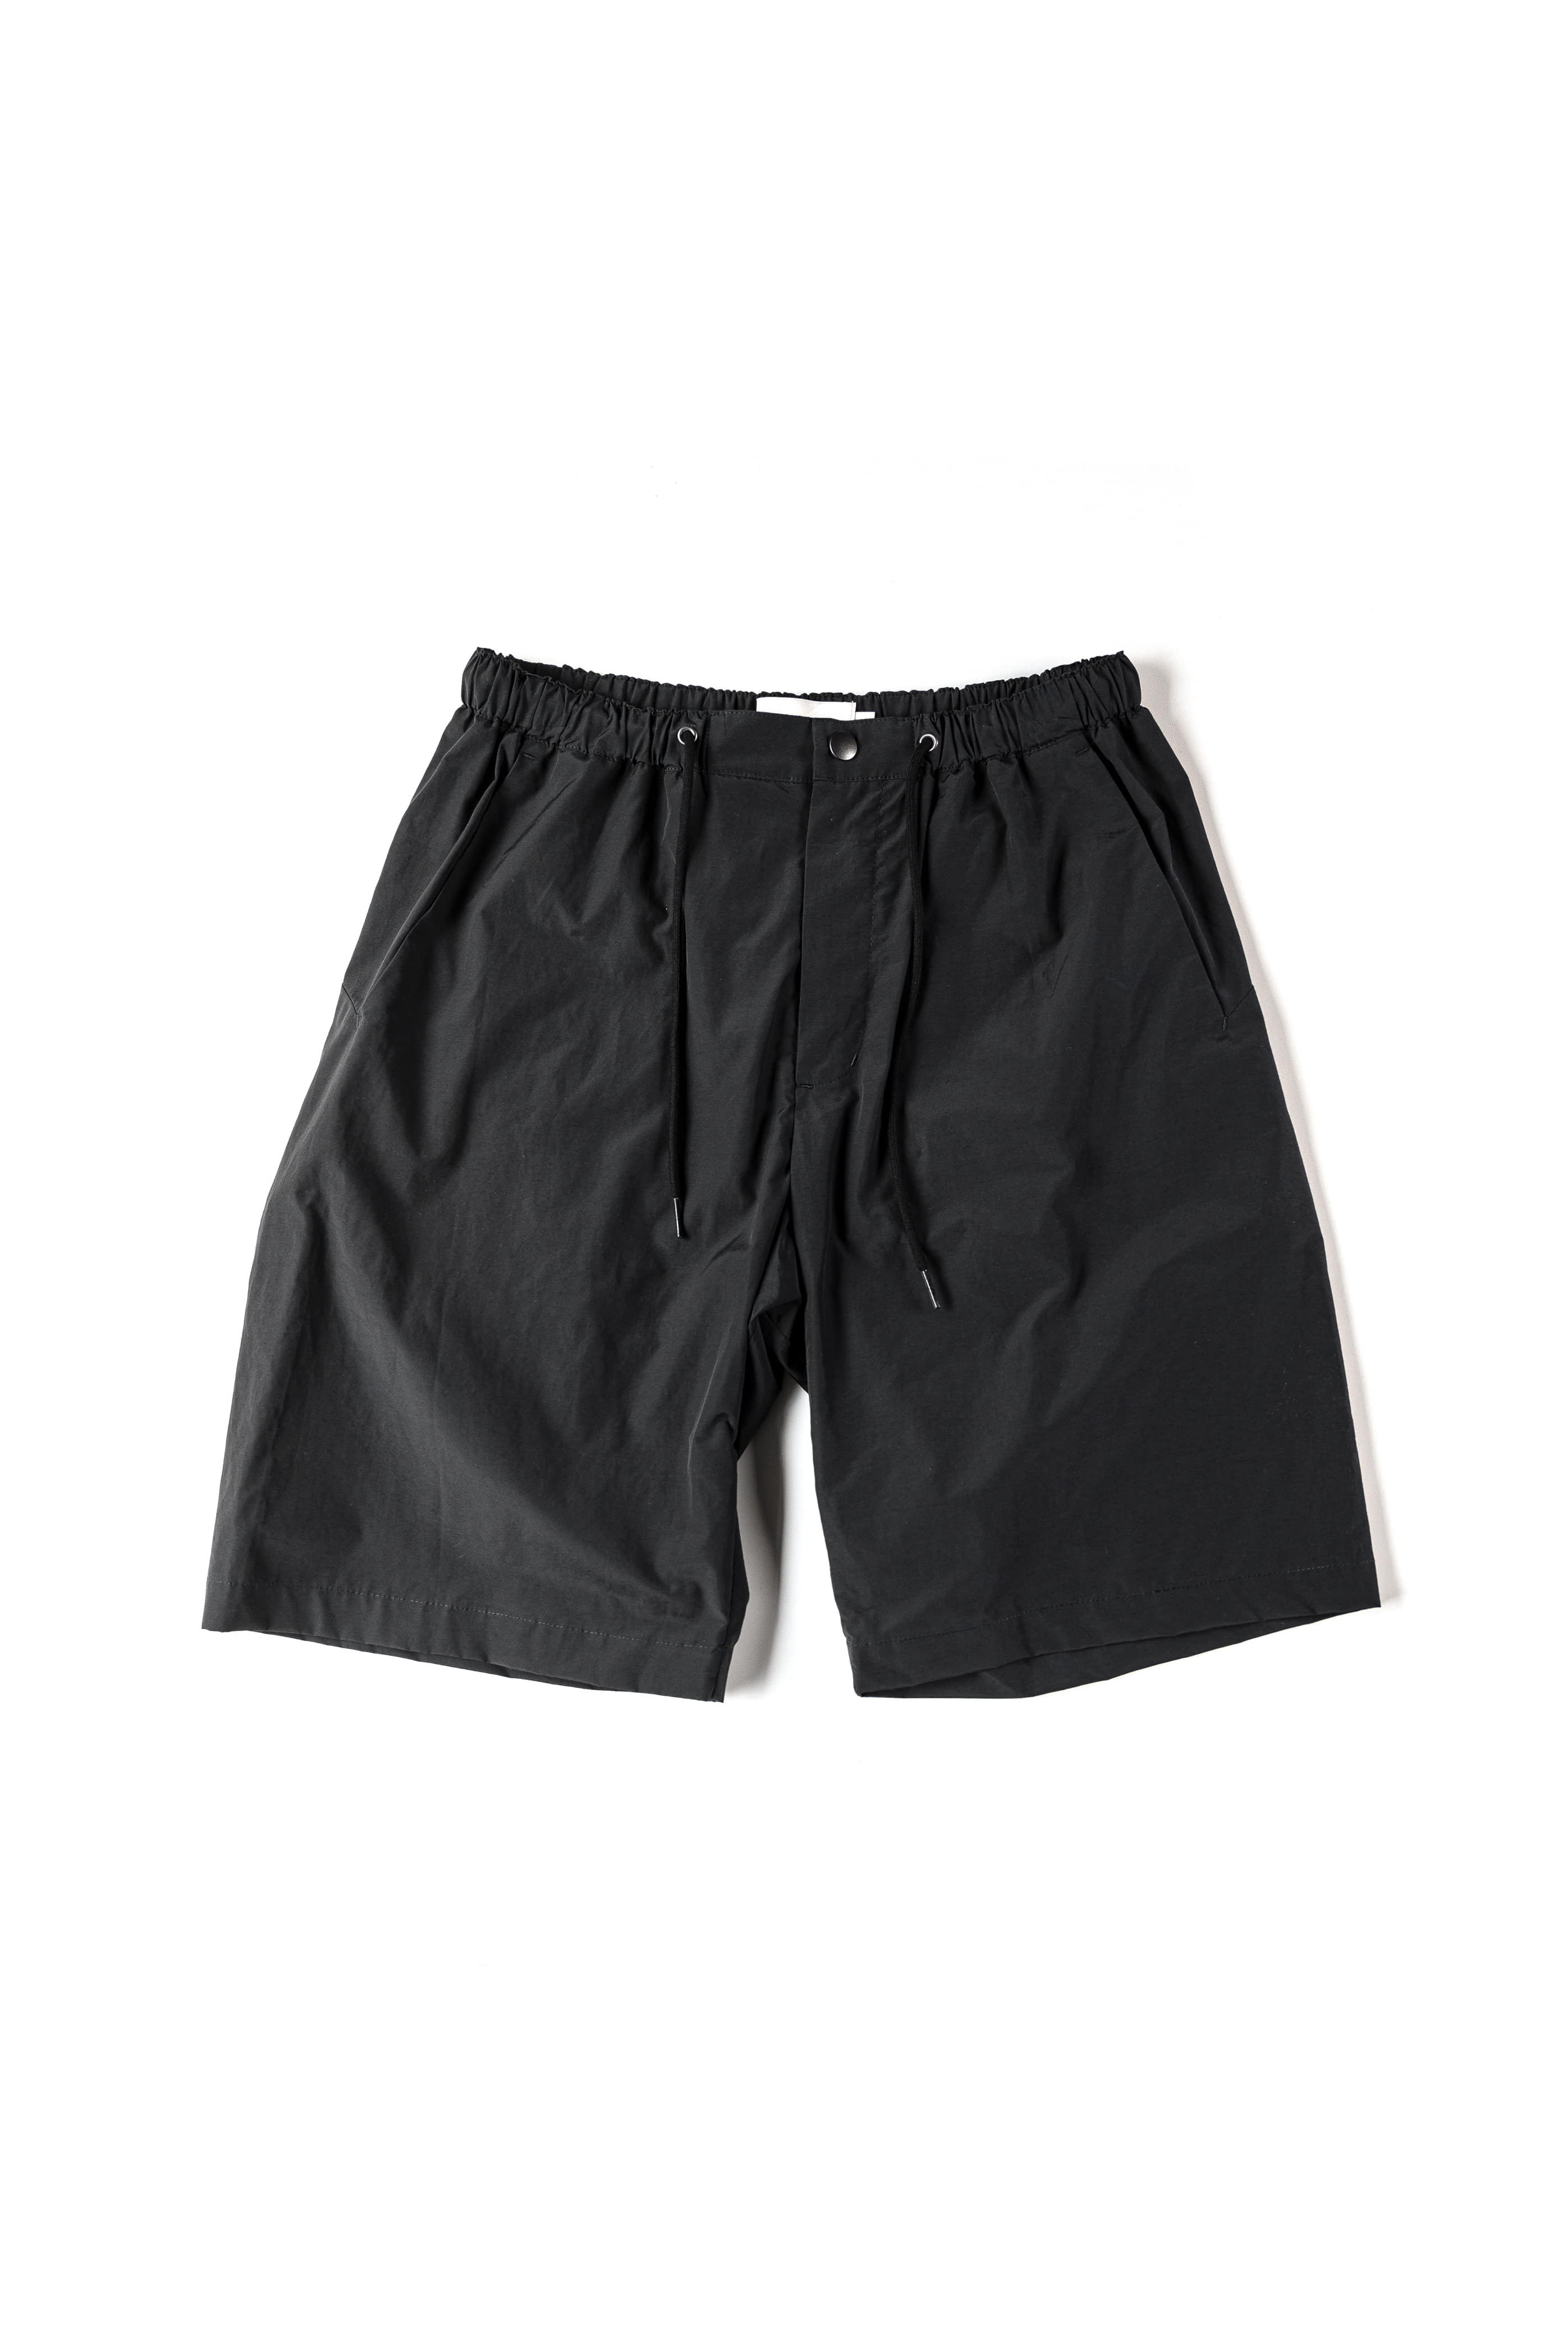 PACKABLE TRAVELLER SHORTS (Charcoal)